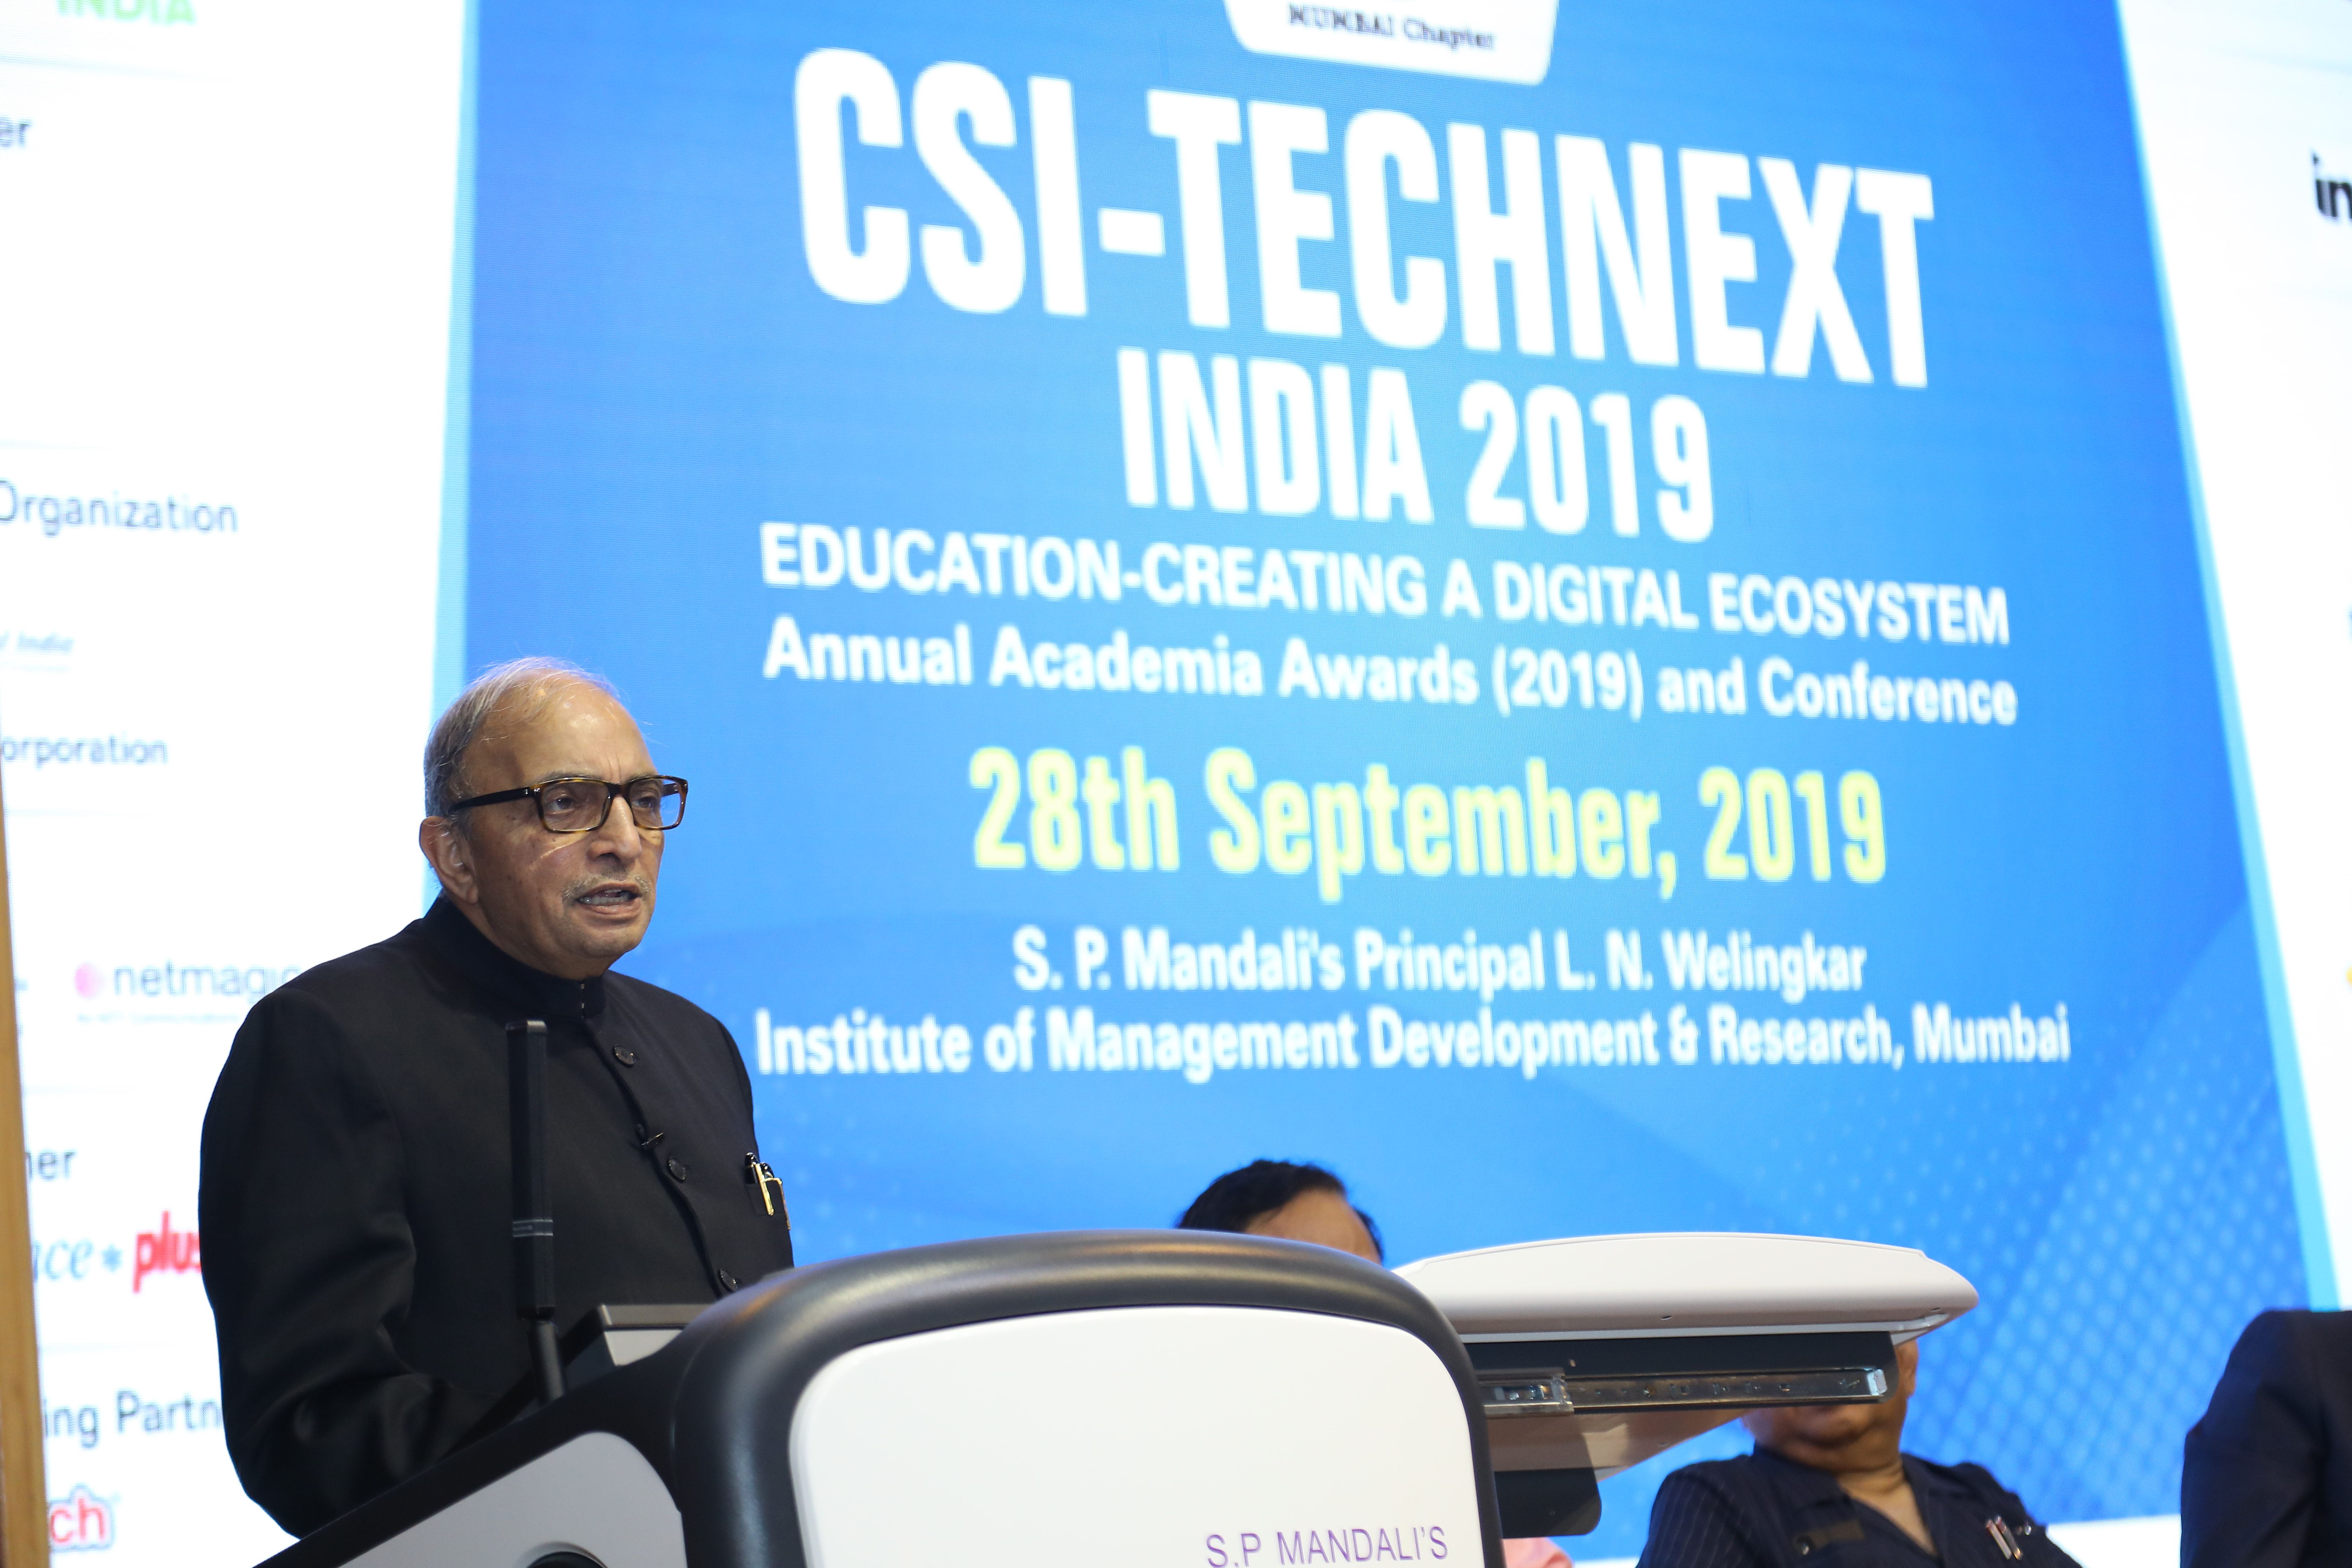 The Computer Society of India, Mumbai Chapter and S.P. Mandali’s WeSchool hosted the CSI TechNext India – 2019 Conference & Annual Industry - Academia Awards 